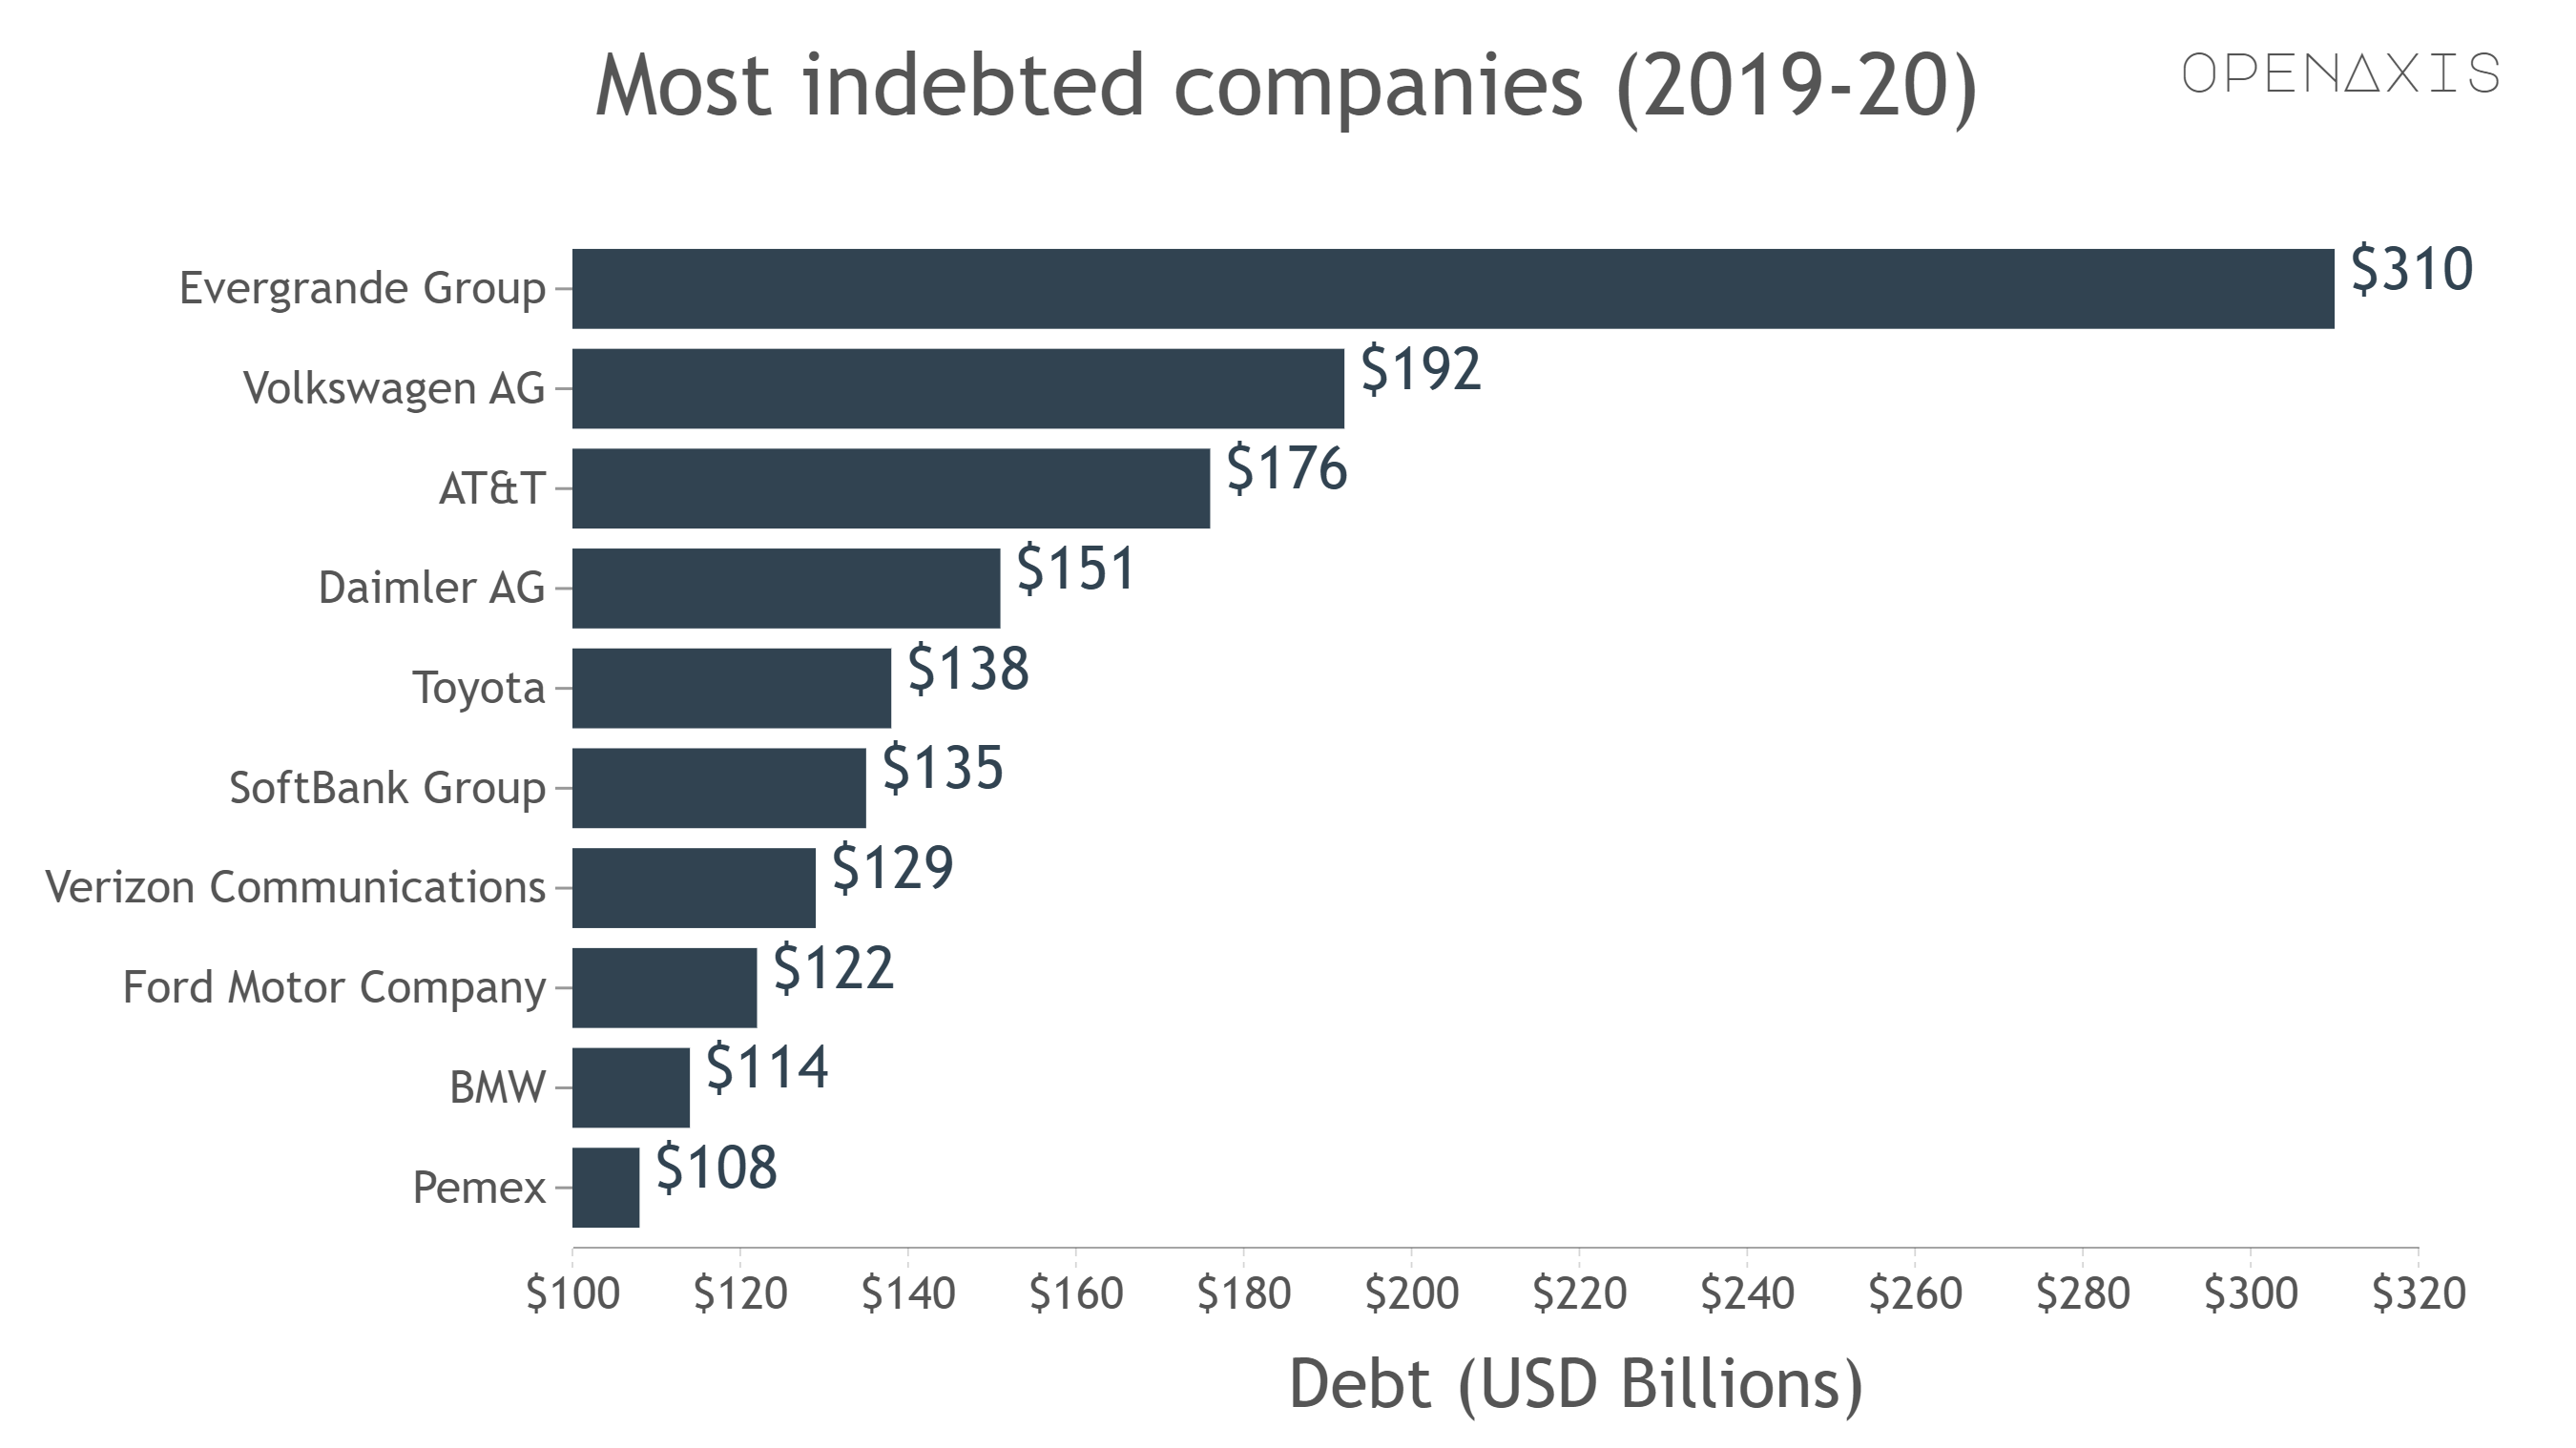 "Most indebted companies (2019-20)"